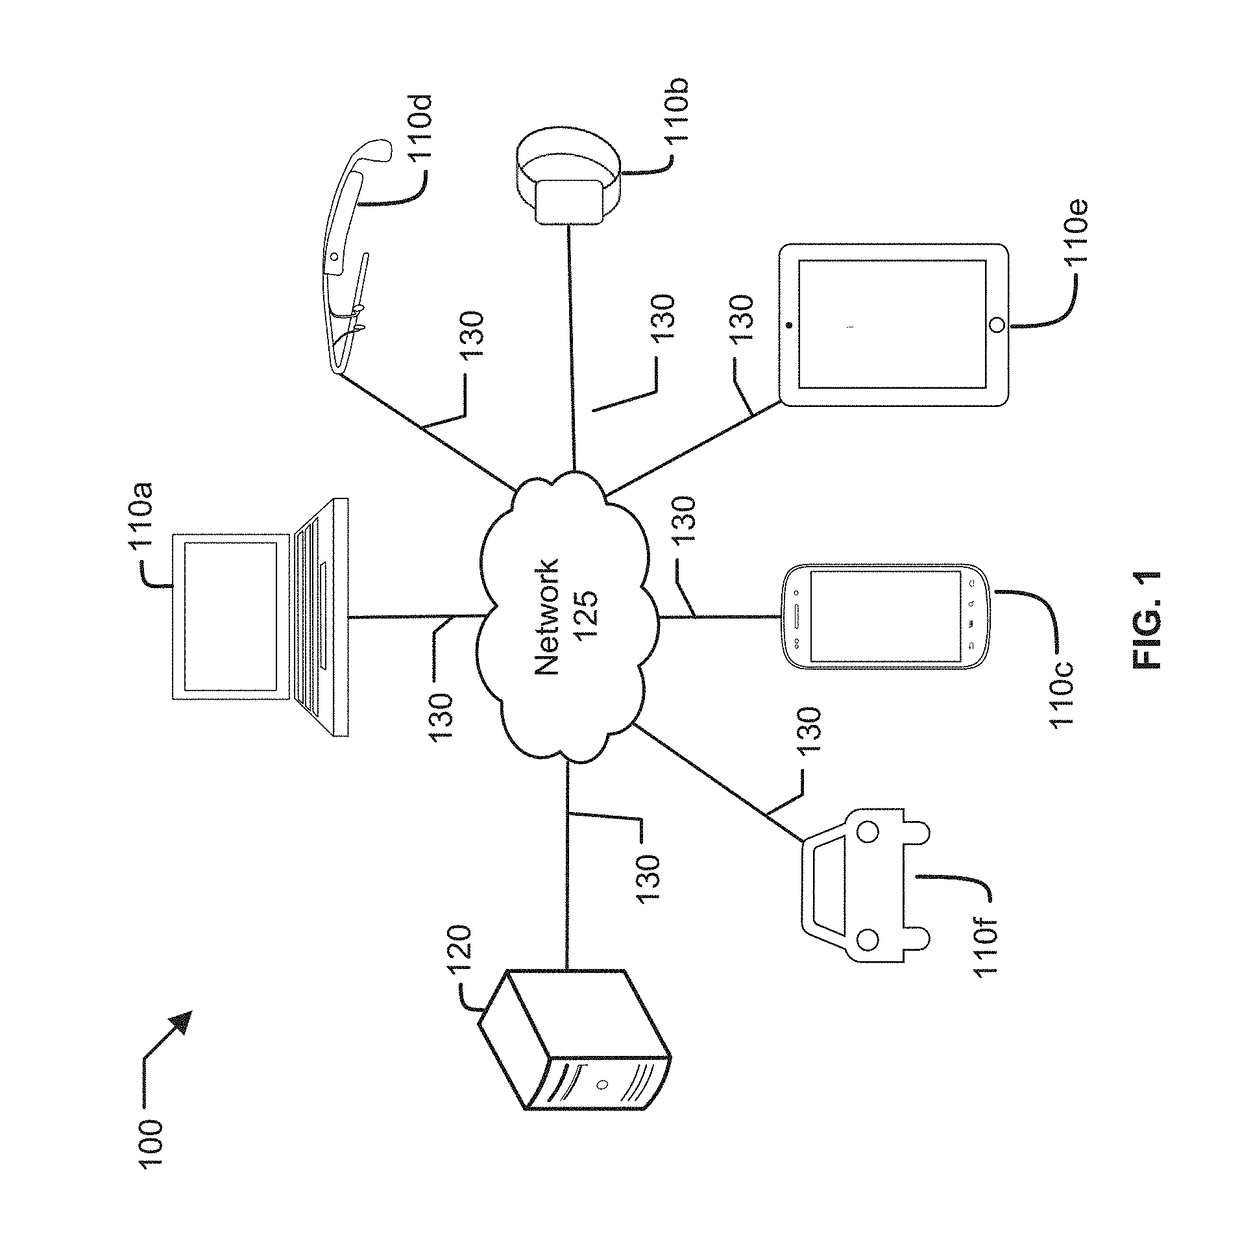 Methods and systems for detecting and preventing network connection compromise